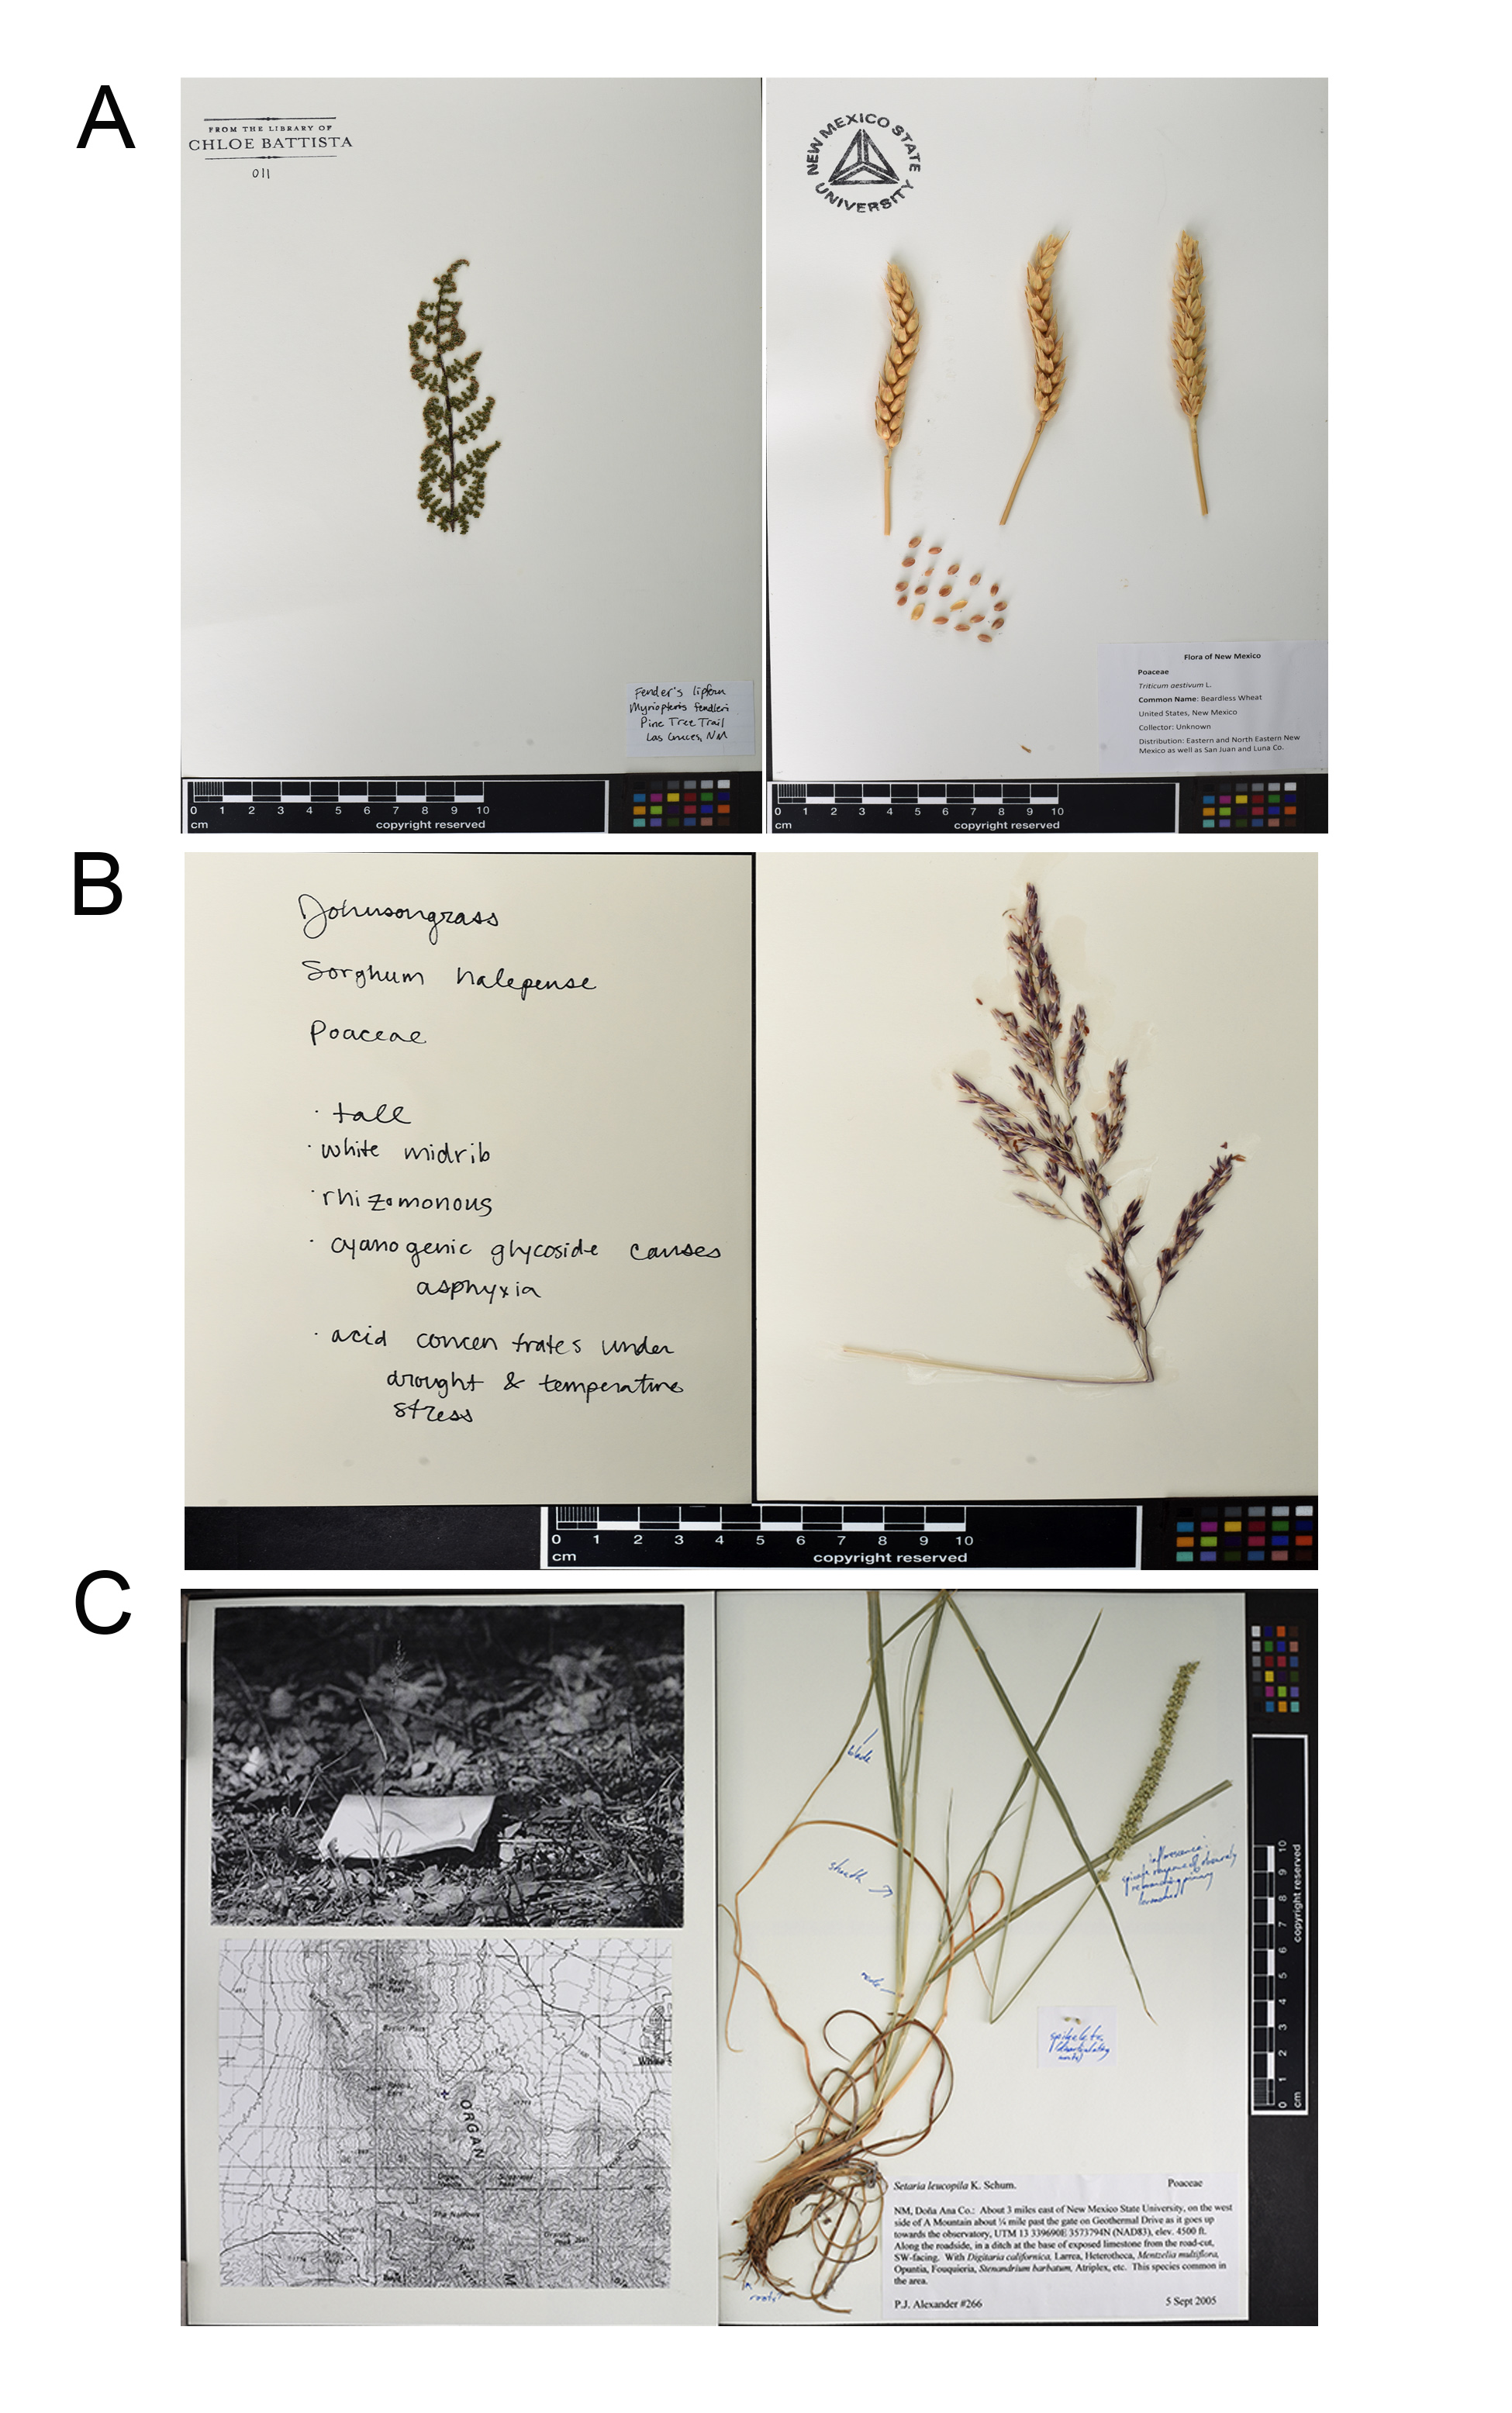 Specific pressed plant parts with label or writing, and large plant in a bent arrangement with landscape photo and map. 